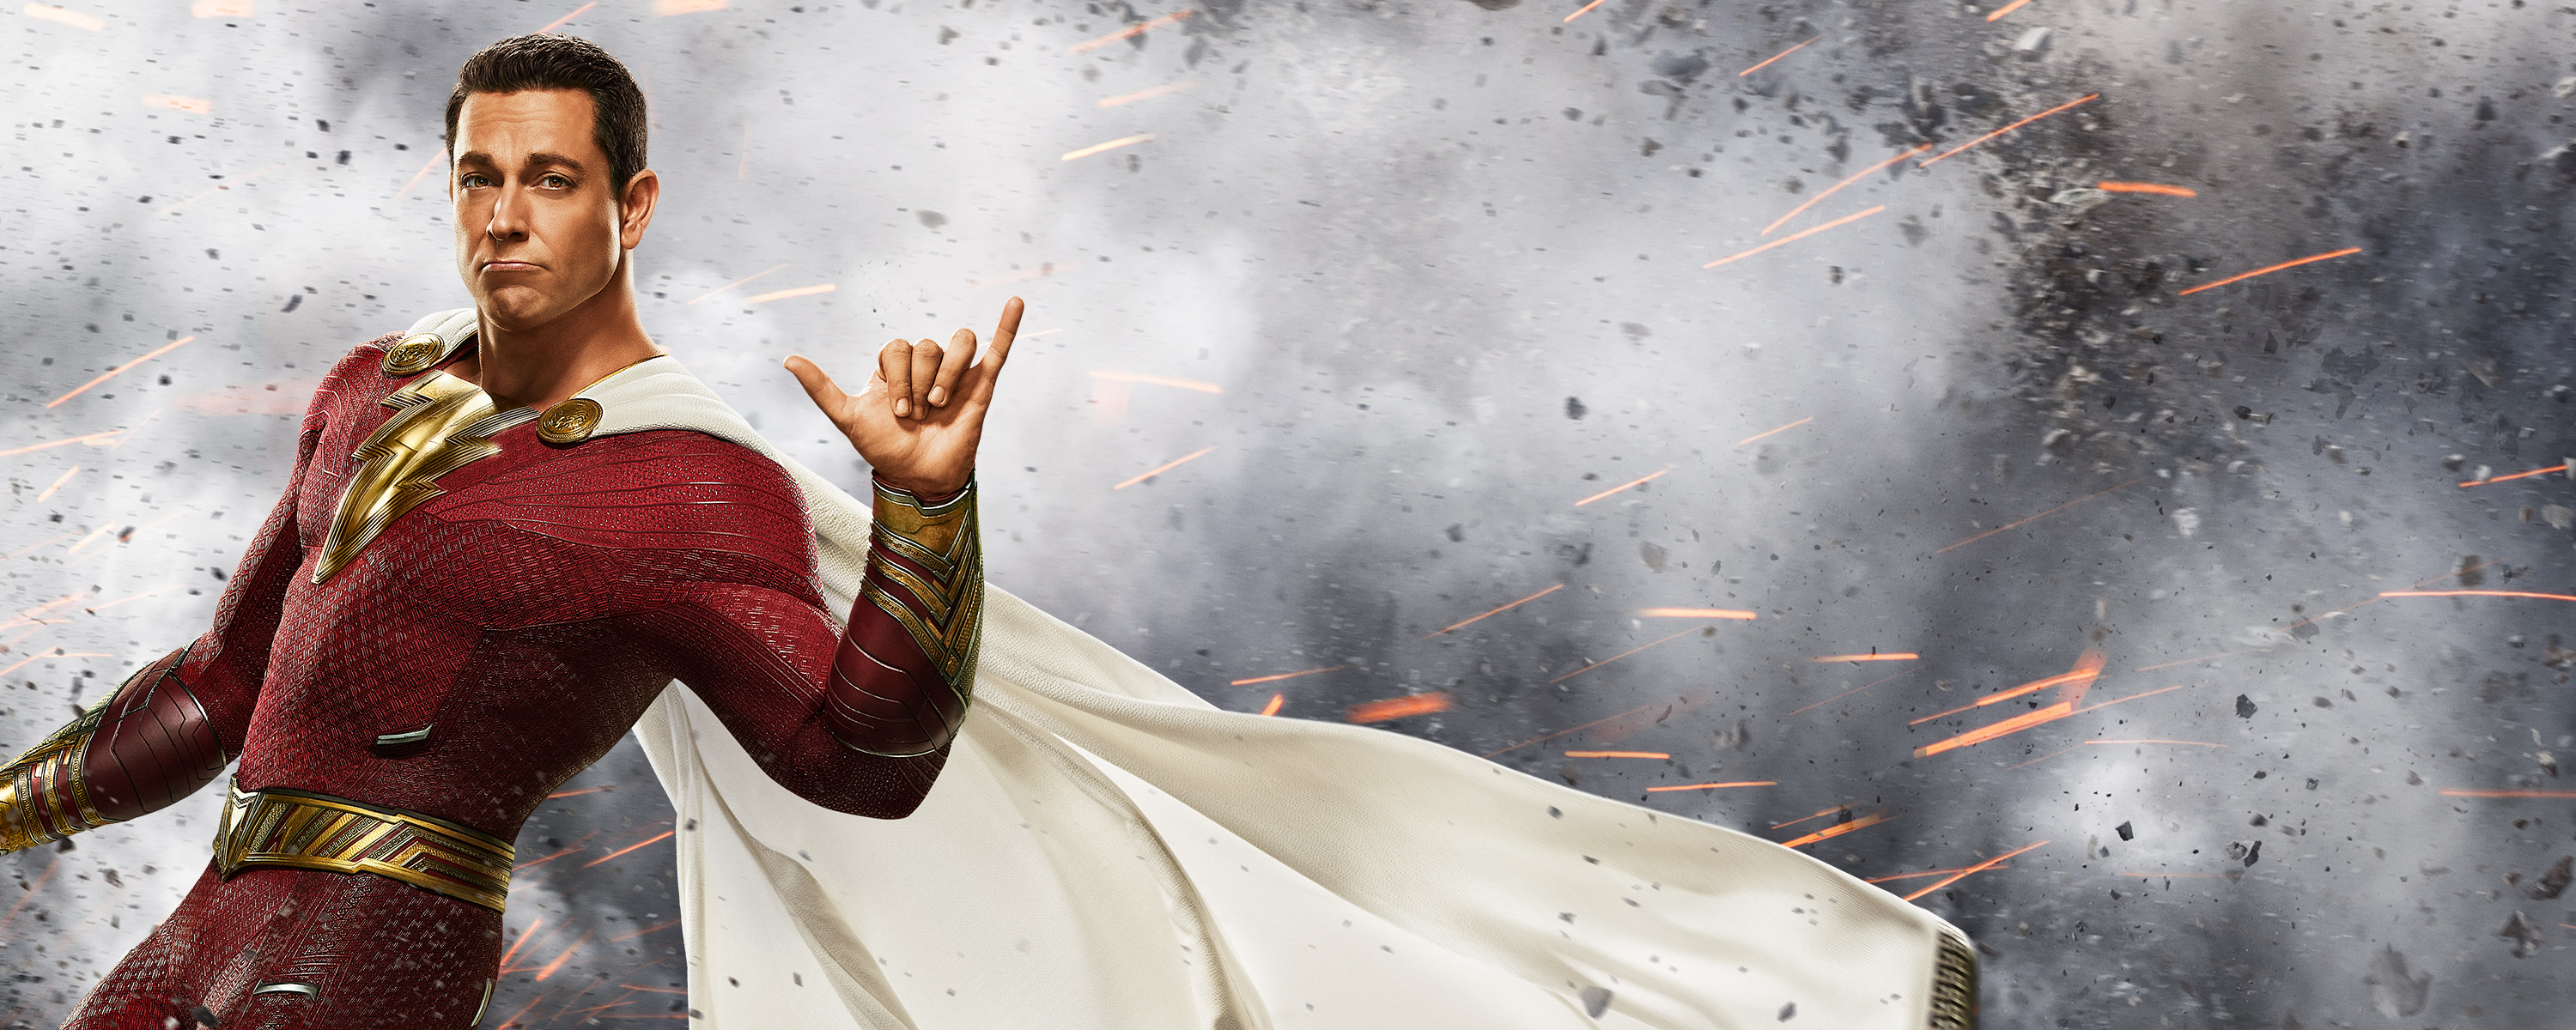 Shazam! Fury Of The Gods Wallpapers - Wallpaper Cave